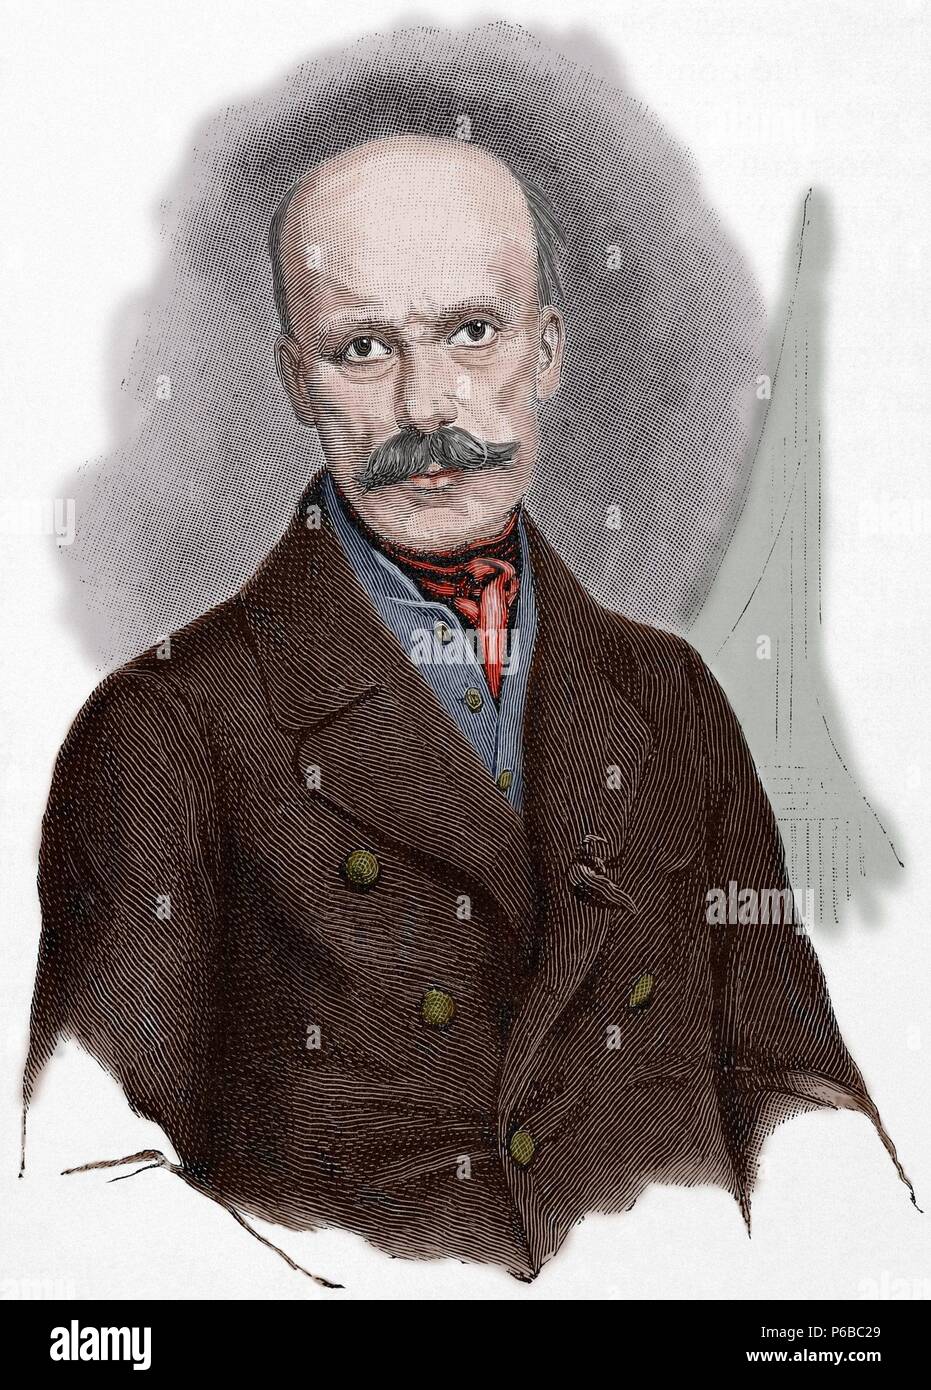 Archduke John of Austria (1782-1859) Member of the Habsburg dynasty, an Austrian field marshal and German Imperial regent. Engraving. Colored. Stock Photo